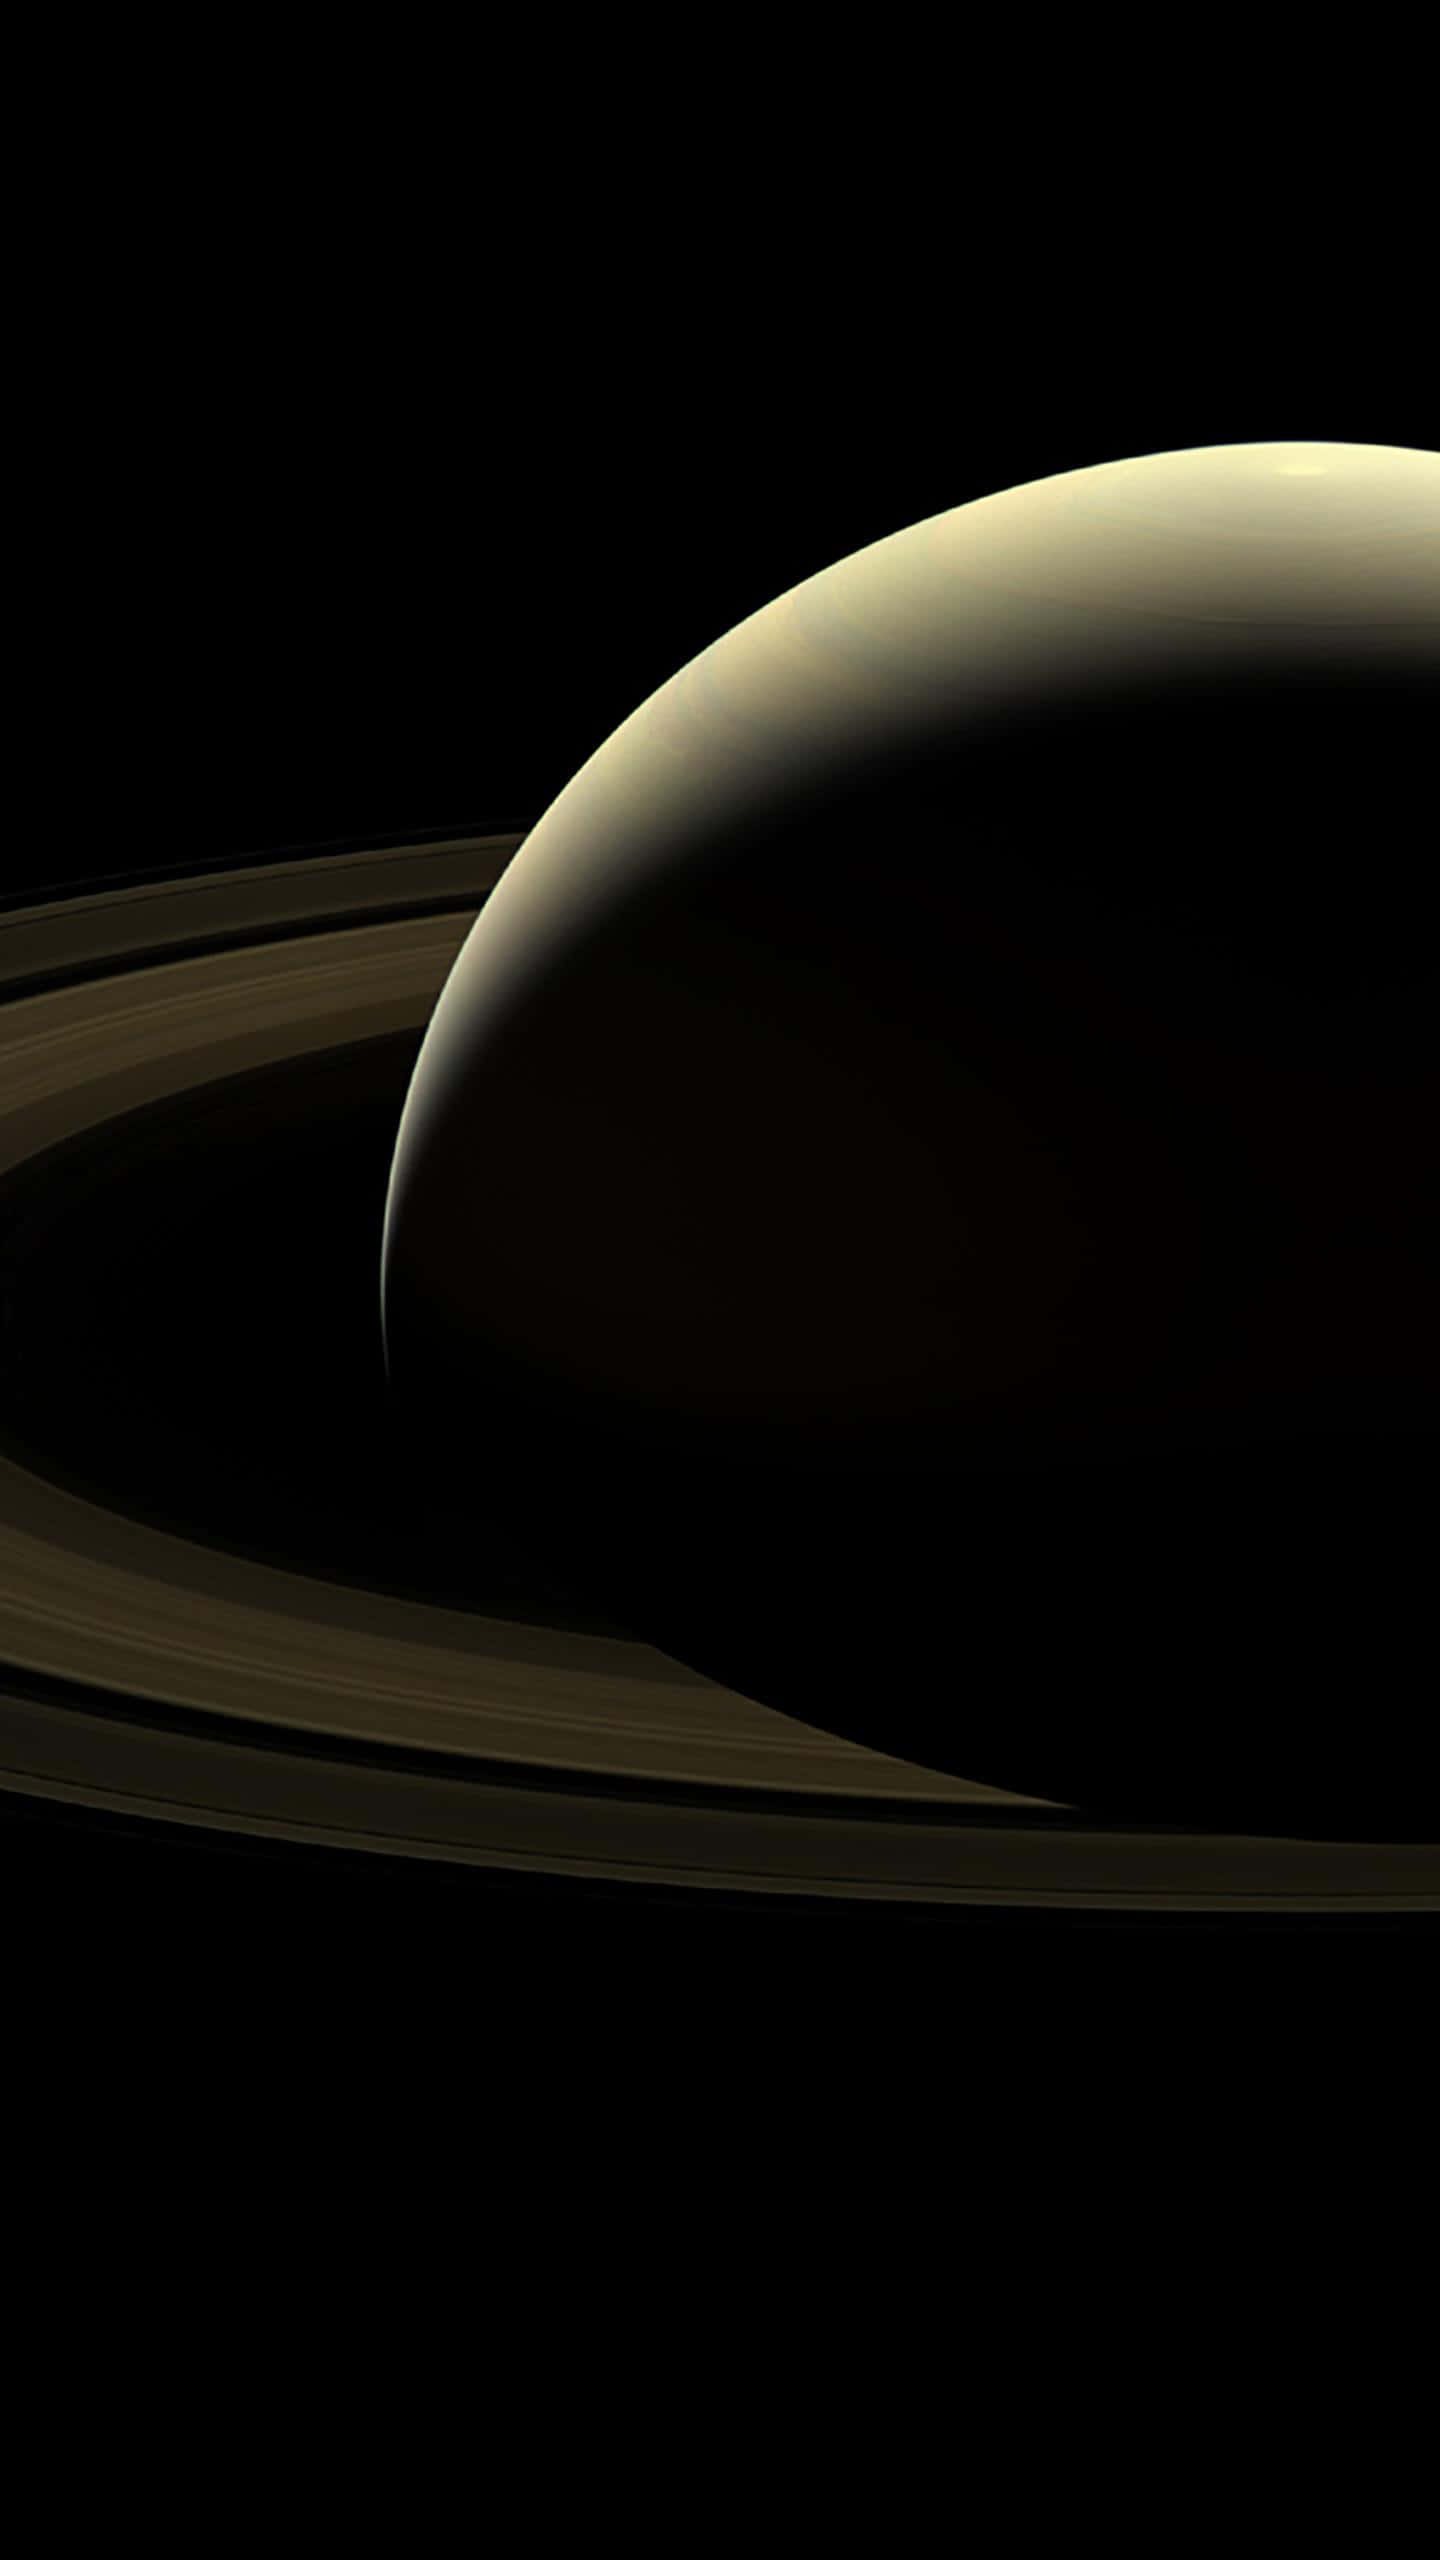 Saturn's Rings Are Seen In This Image